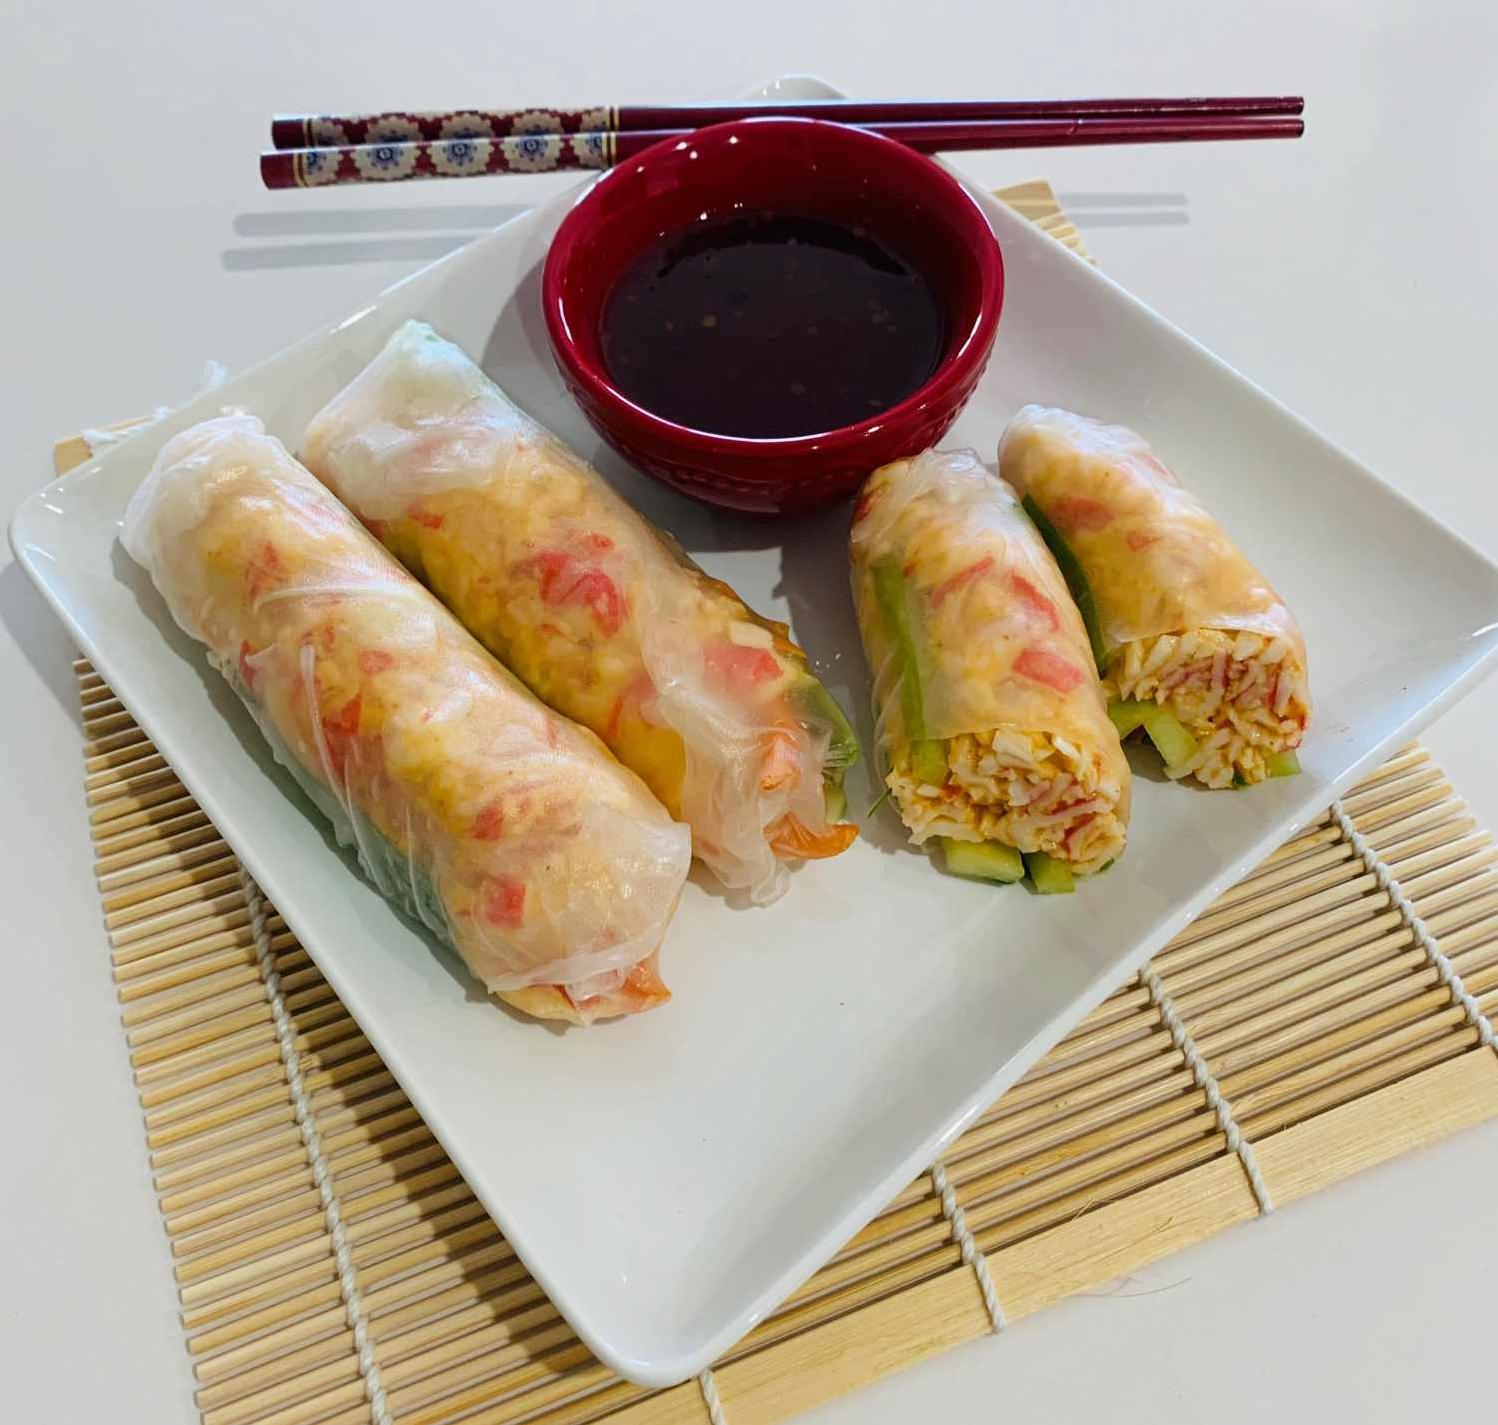  The crunch of the vegetables adds a nice contrast to the soft roll